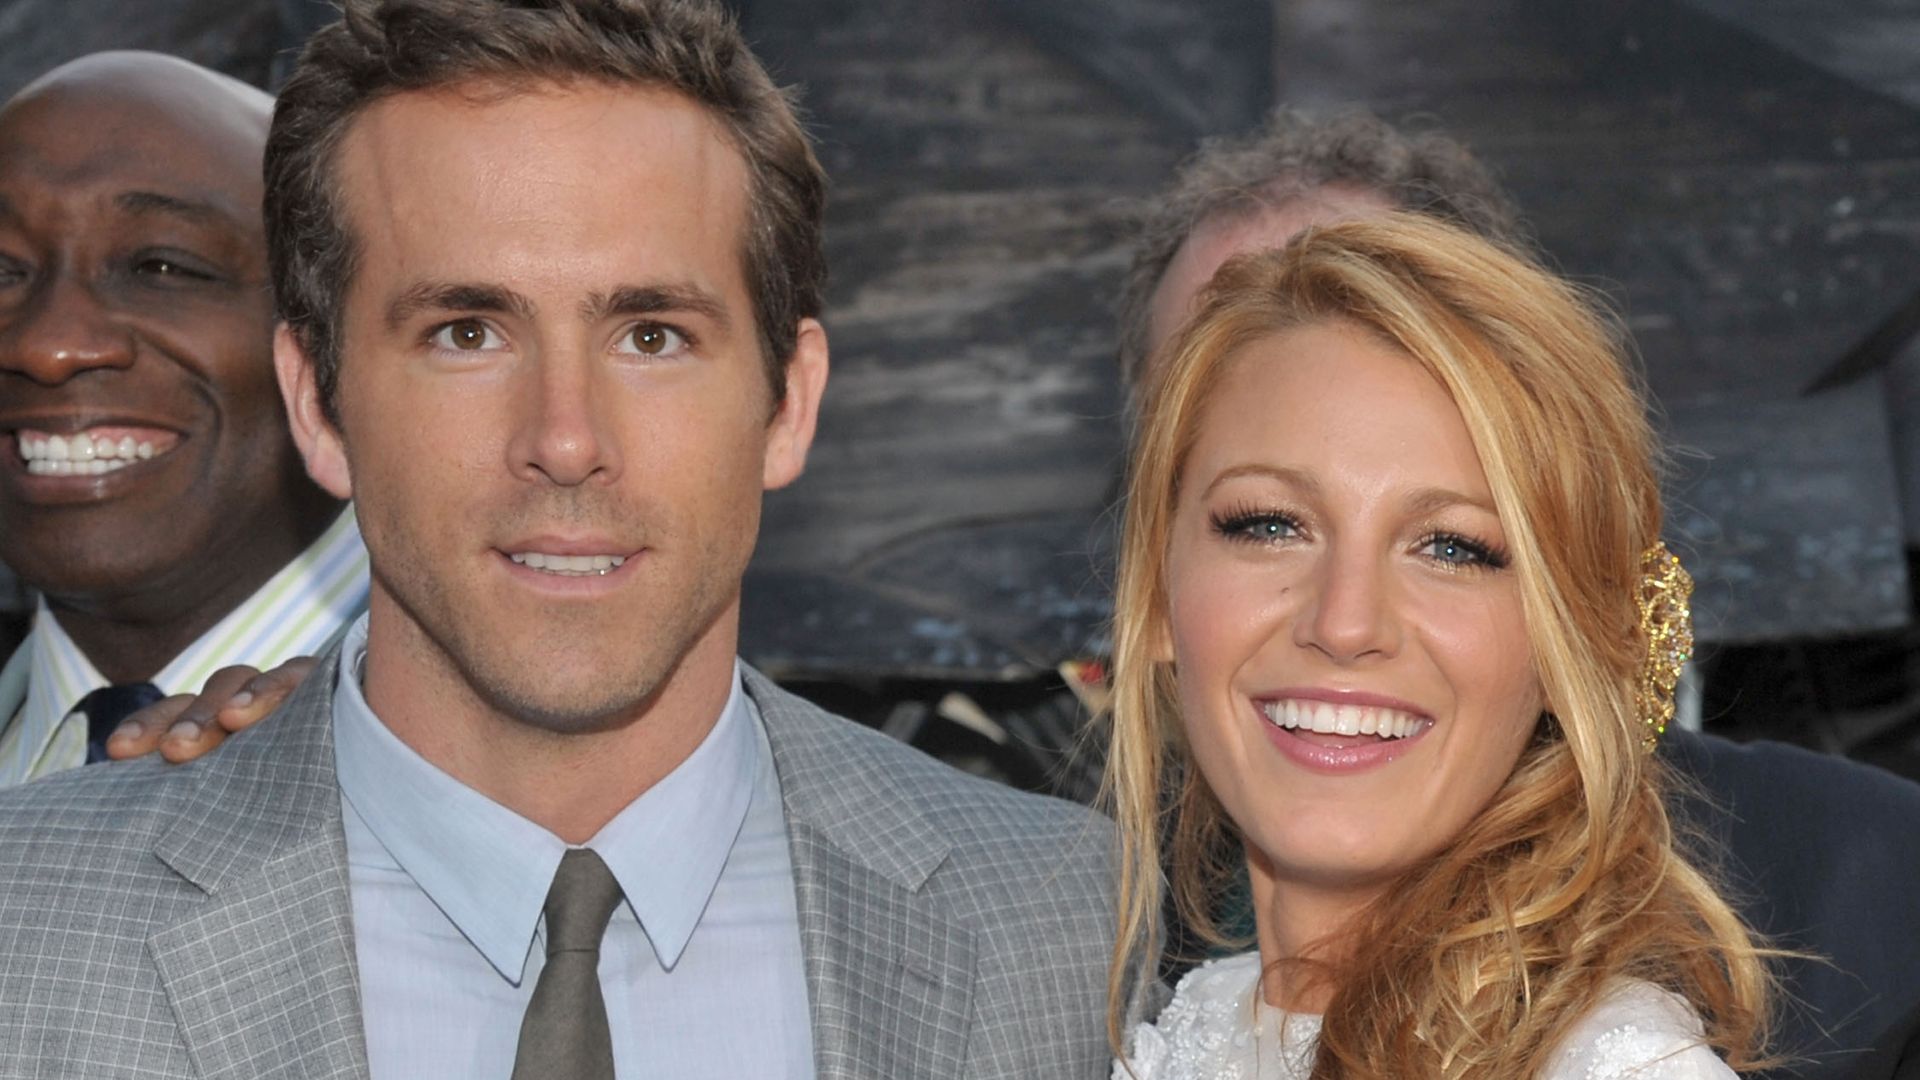 Blake Lively in a white dress with Ryan Reynolds in a grey suit smiling for photos at the Green Lantern premiere in 2011 